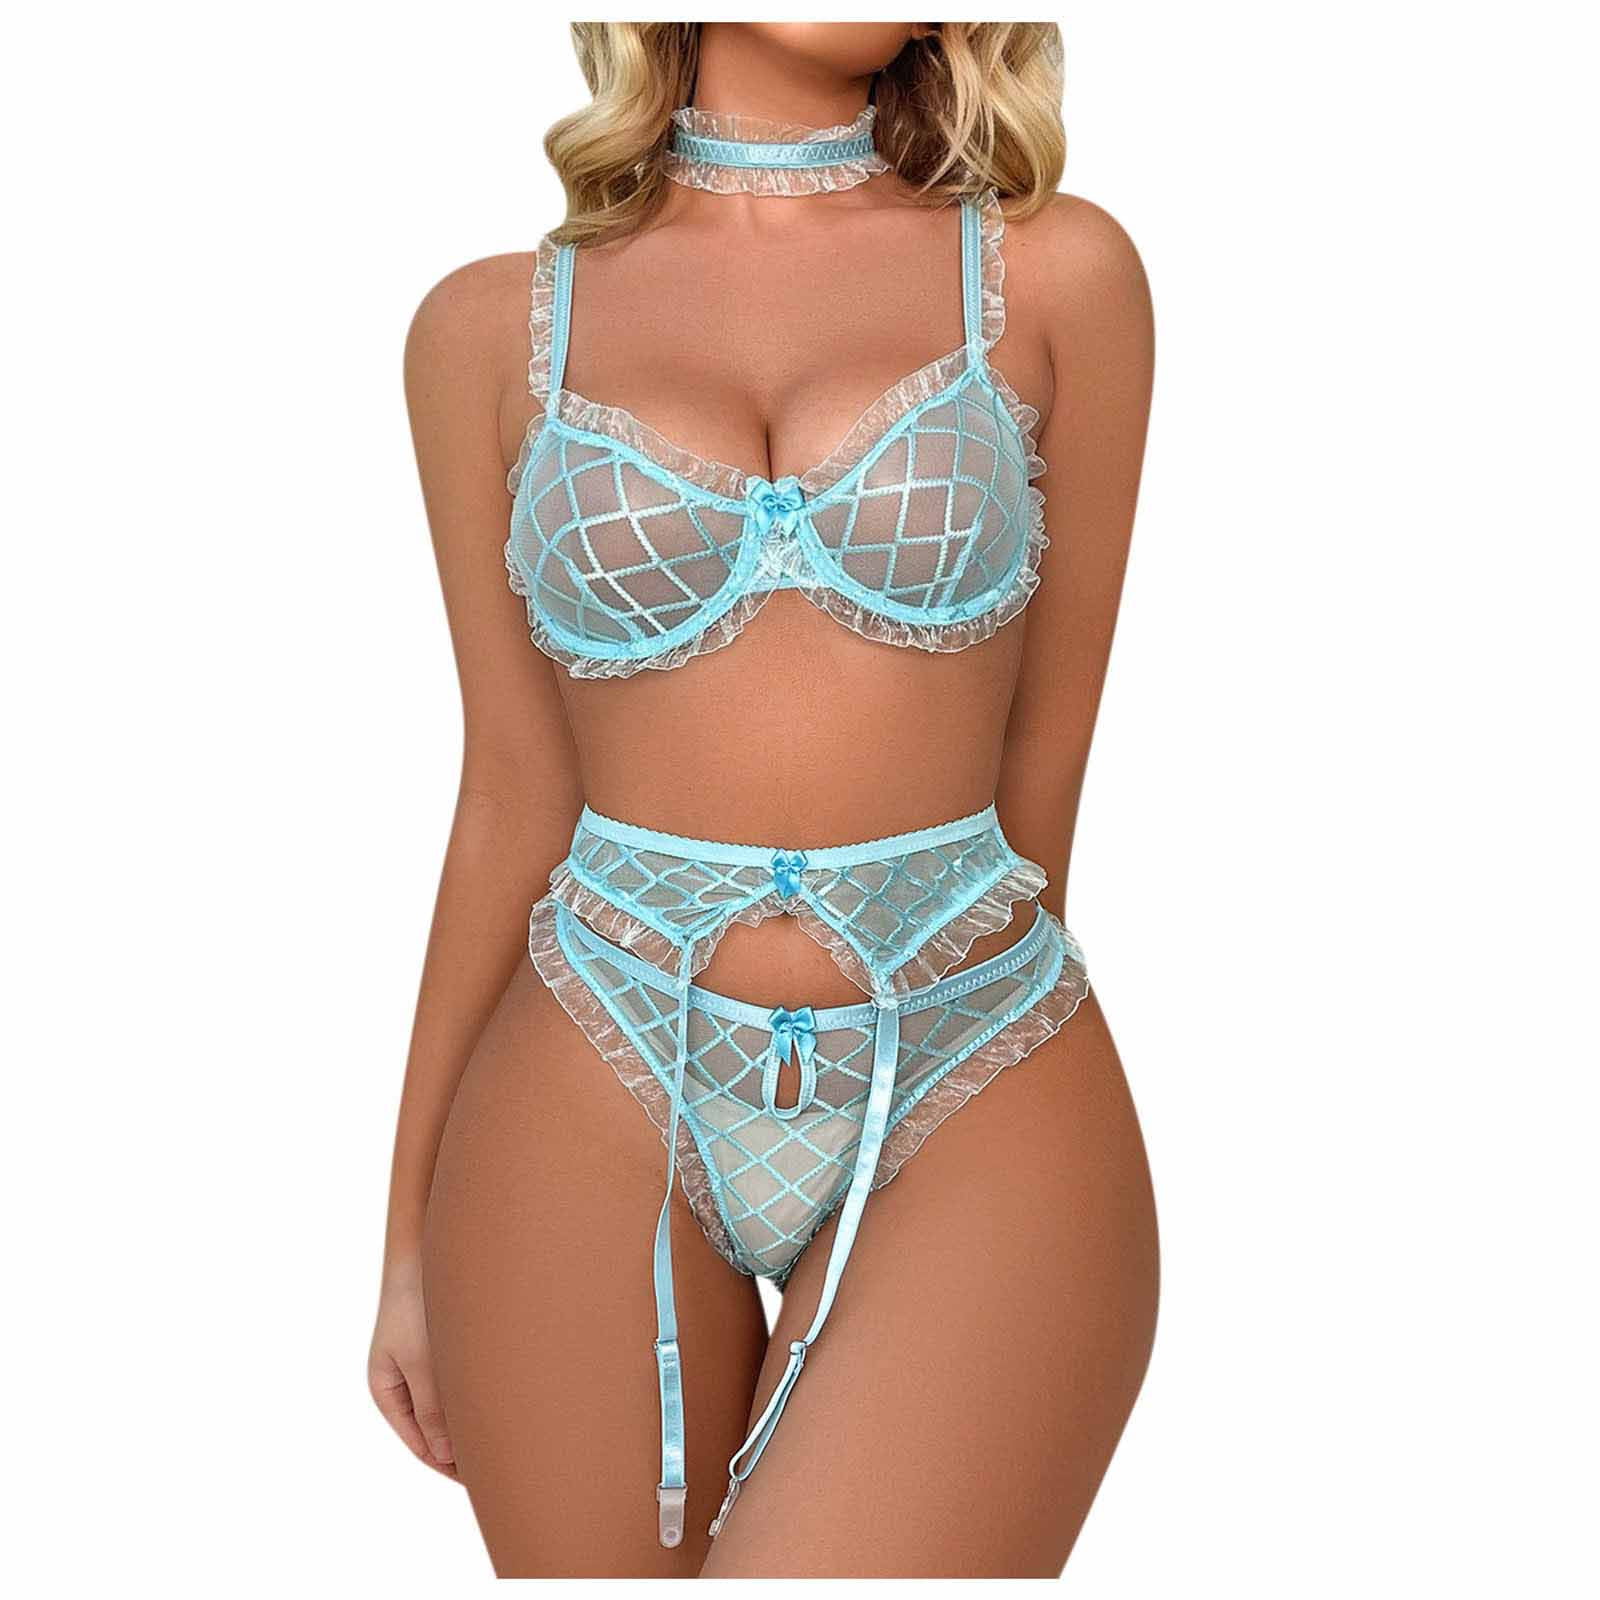 JeashCHAT Babydoll Lingerie for Women Ladies Sexy Lingerie Hollow Sexy  One-piece Lace Perspective Sexy Small Chest Underwear 